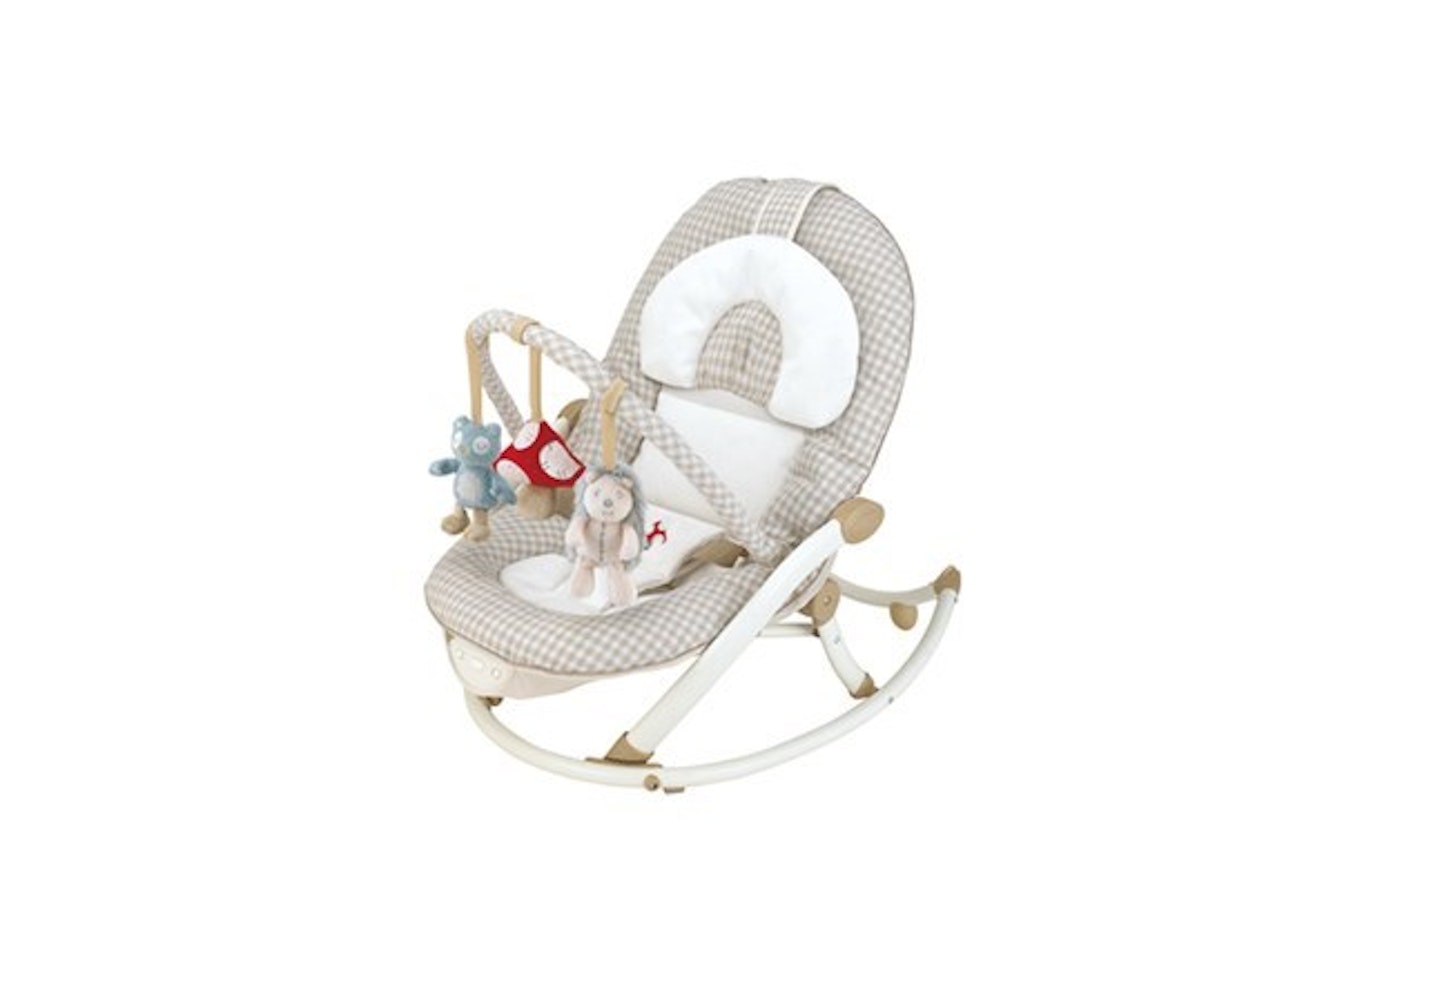 Kiddicare Woodland Baby Bouncer review